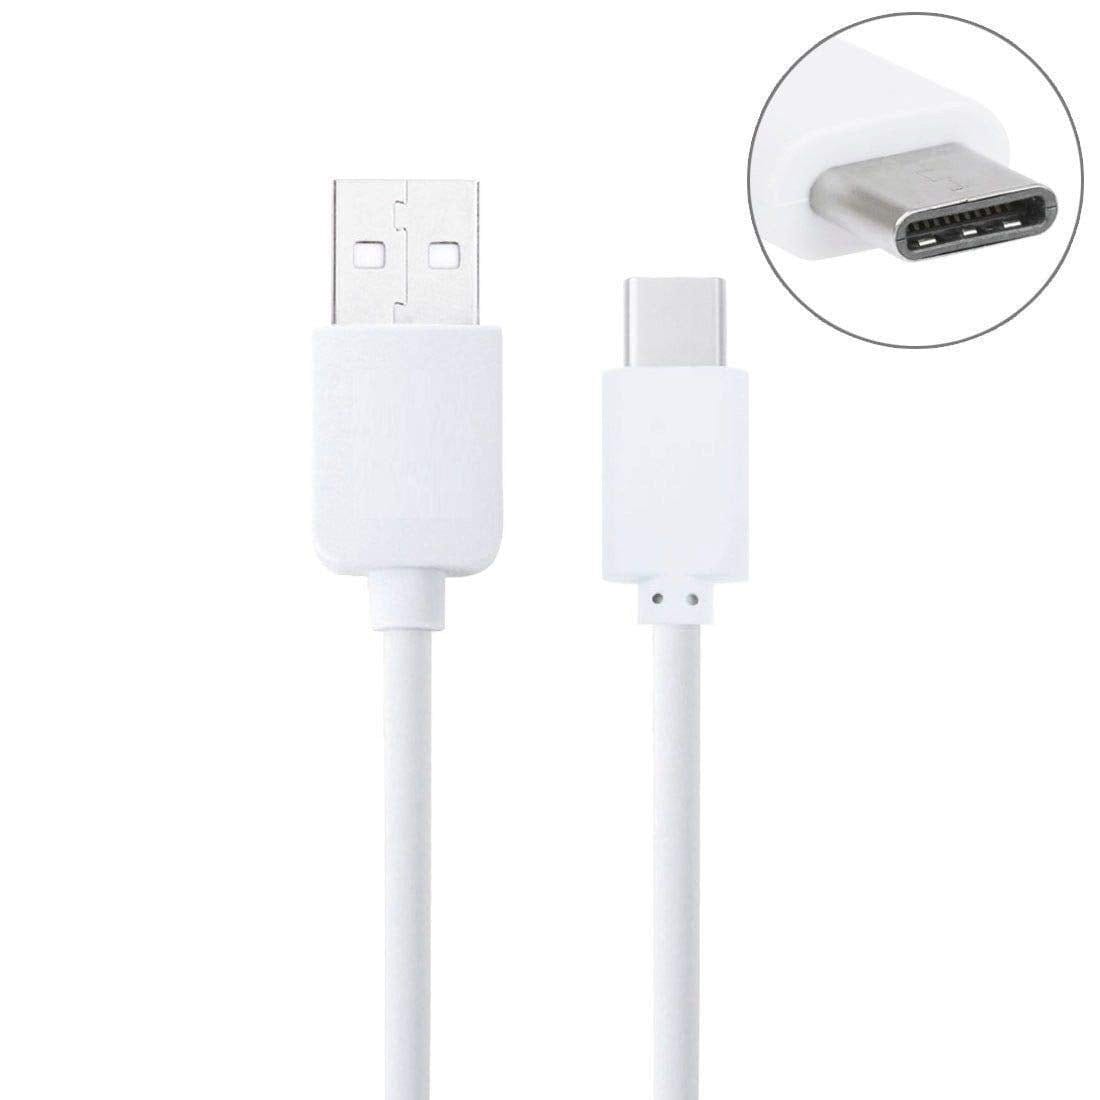 Samsung Galaxy A21s USB to Type C Phone Charger Charging Cable Lead White - 1M - SmartPhoneGadgetUK